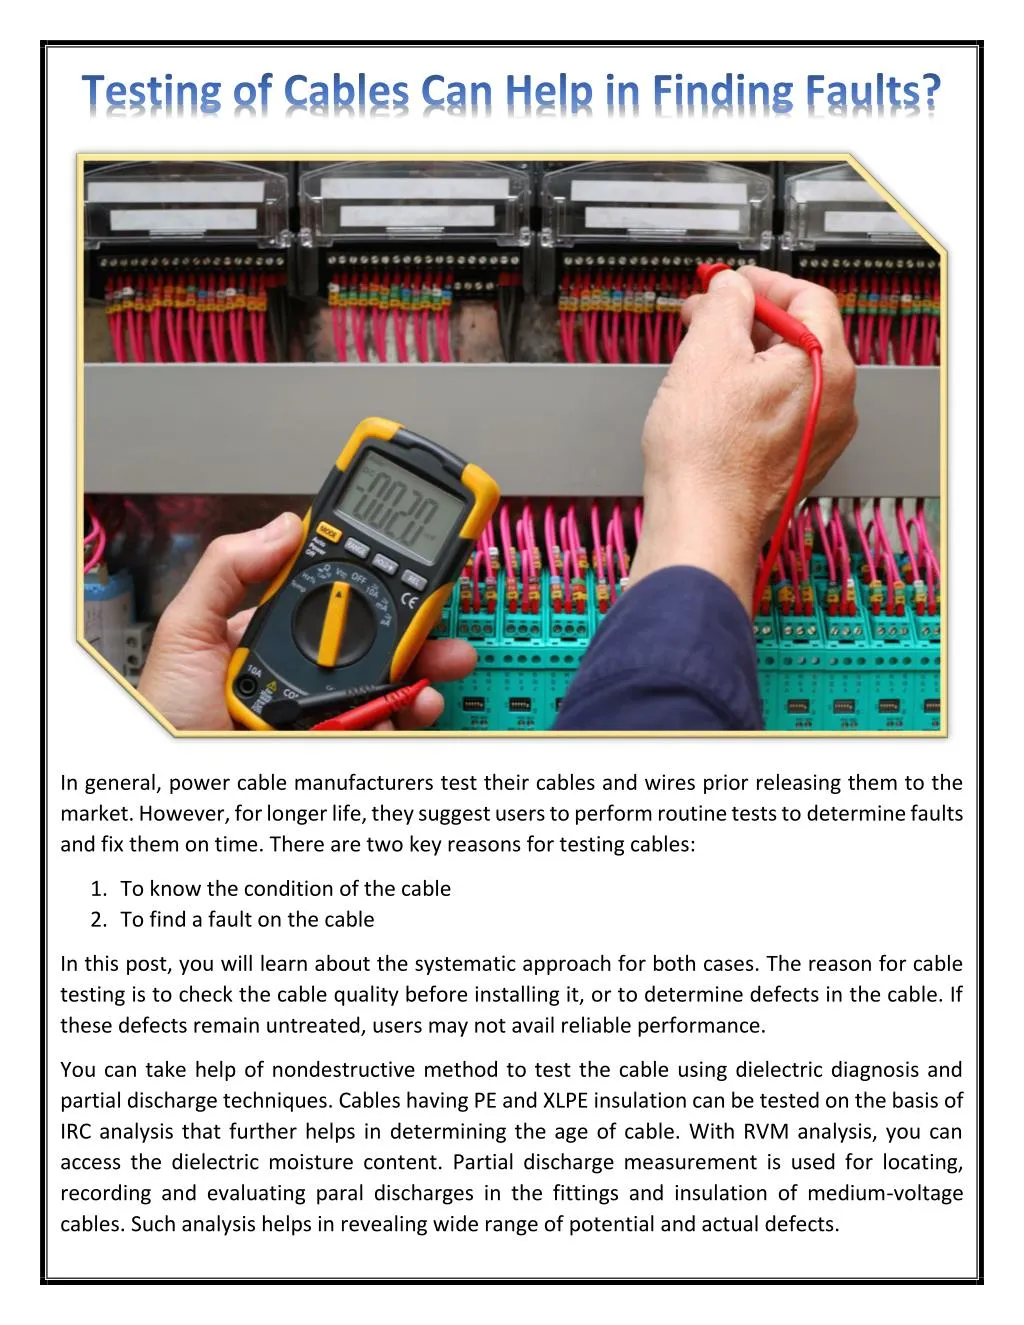 in general power cable manufacturers test their